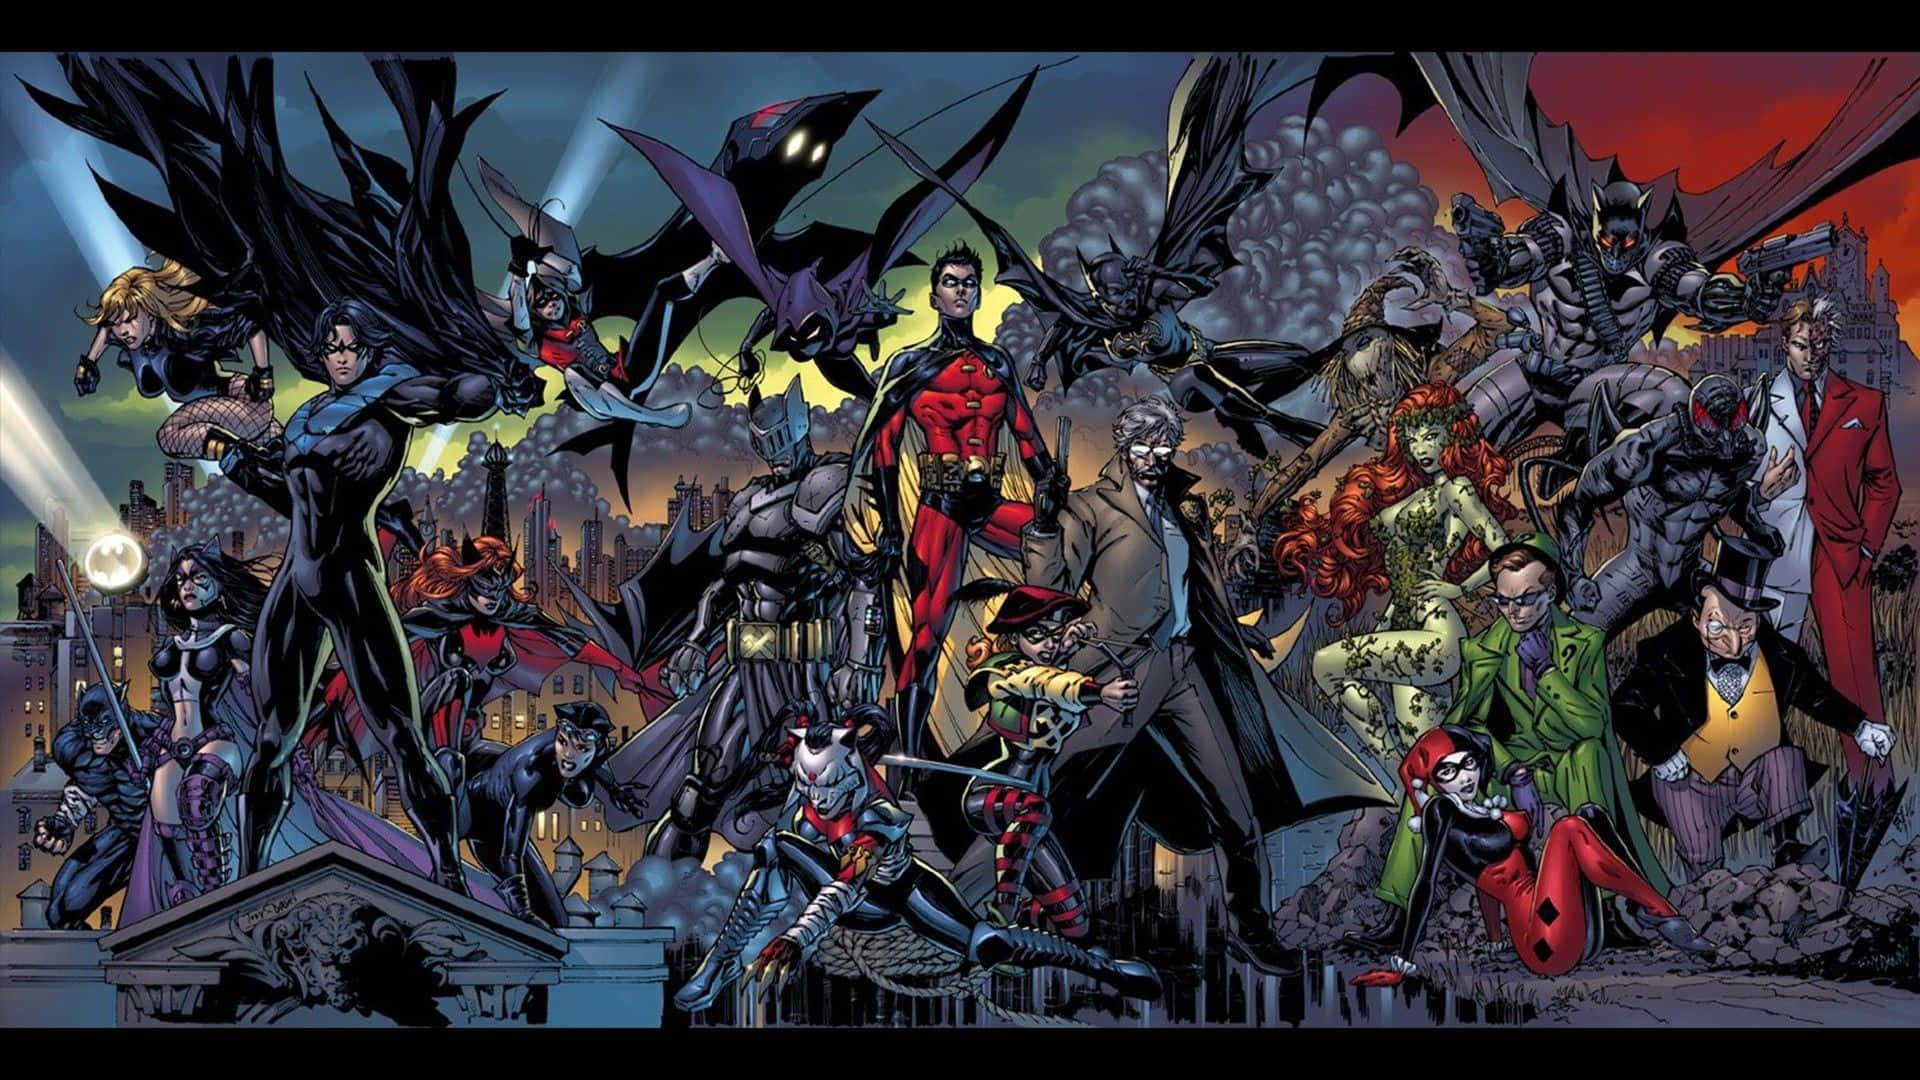 The Bat-Family Unites: Batman and His Team in Action Wallpaper